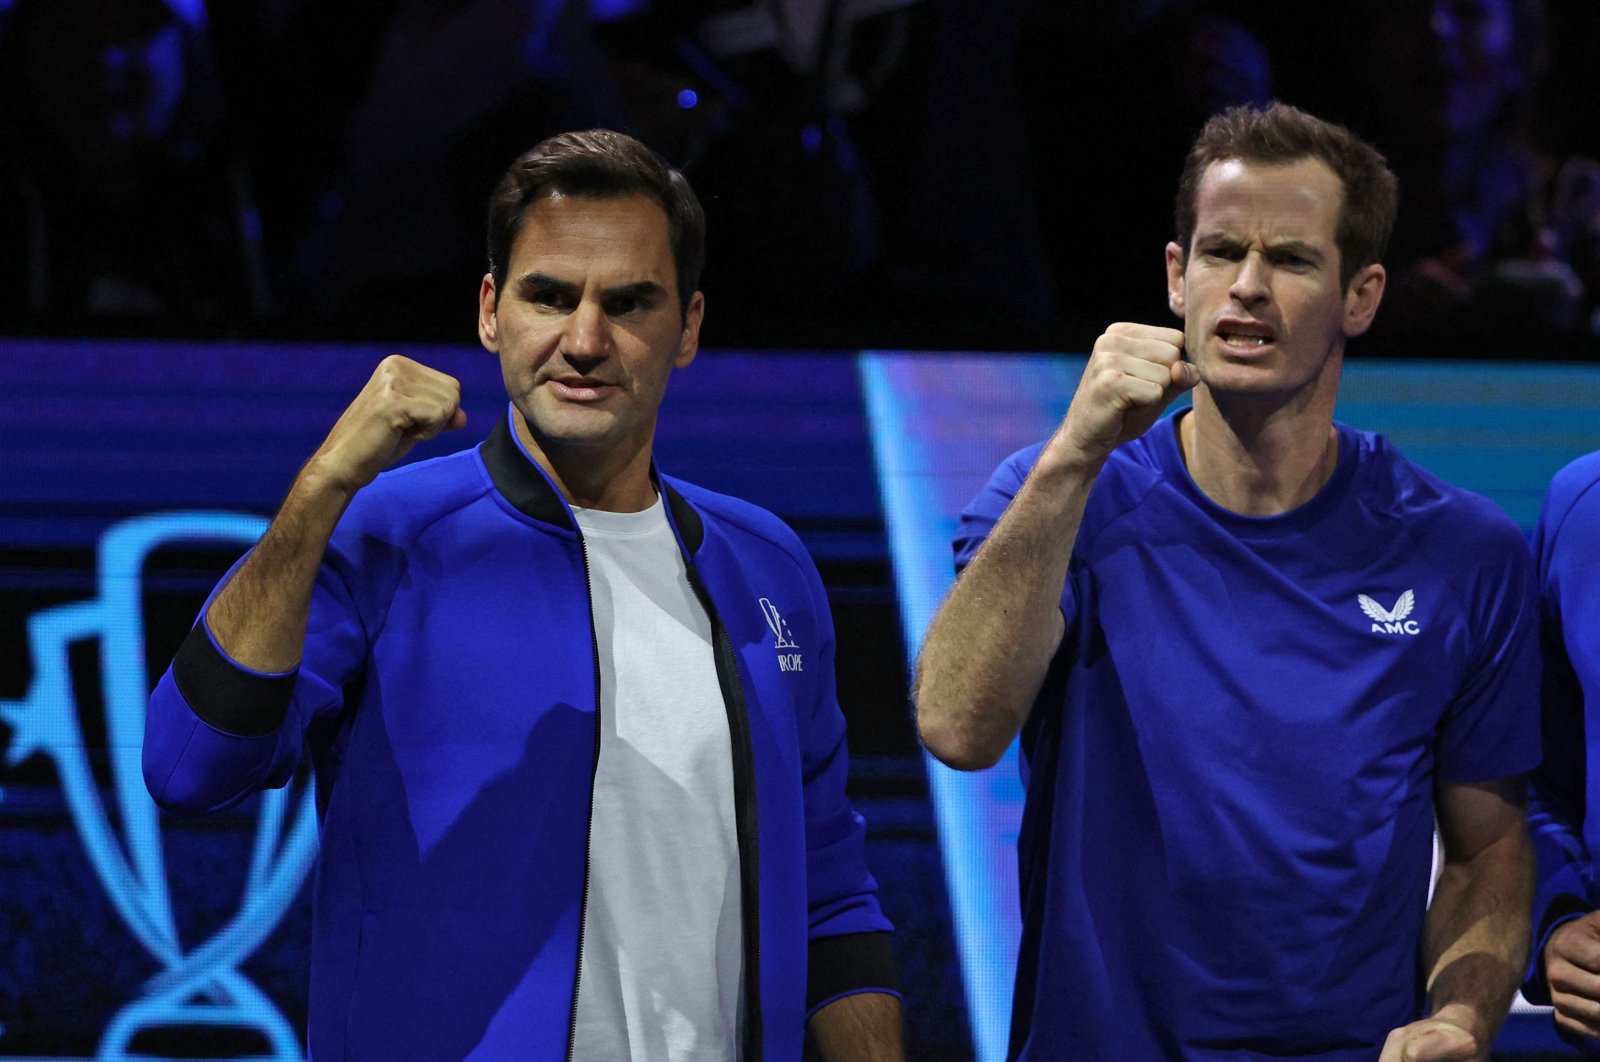 Roger Federer (L) and Andy Murray (R) react during the match between Tsitsipas and Tiafoe during their 2022 Laver Cup men&#039;s singles tennis match at the O2 Arena. London, Sept. 25, 2022. ( AFP Photo)